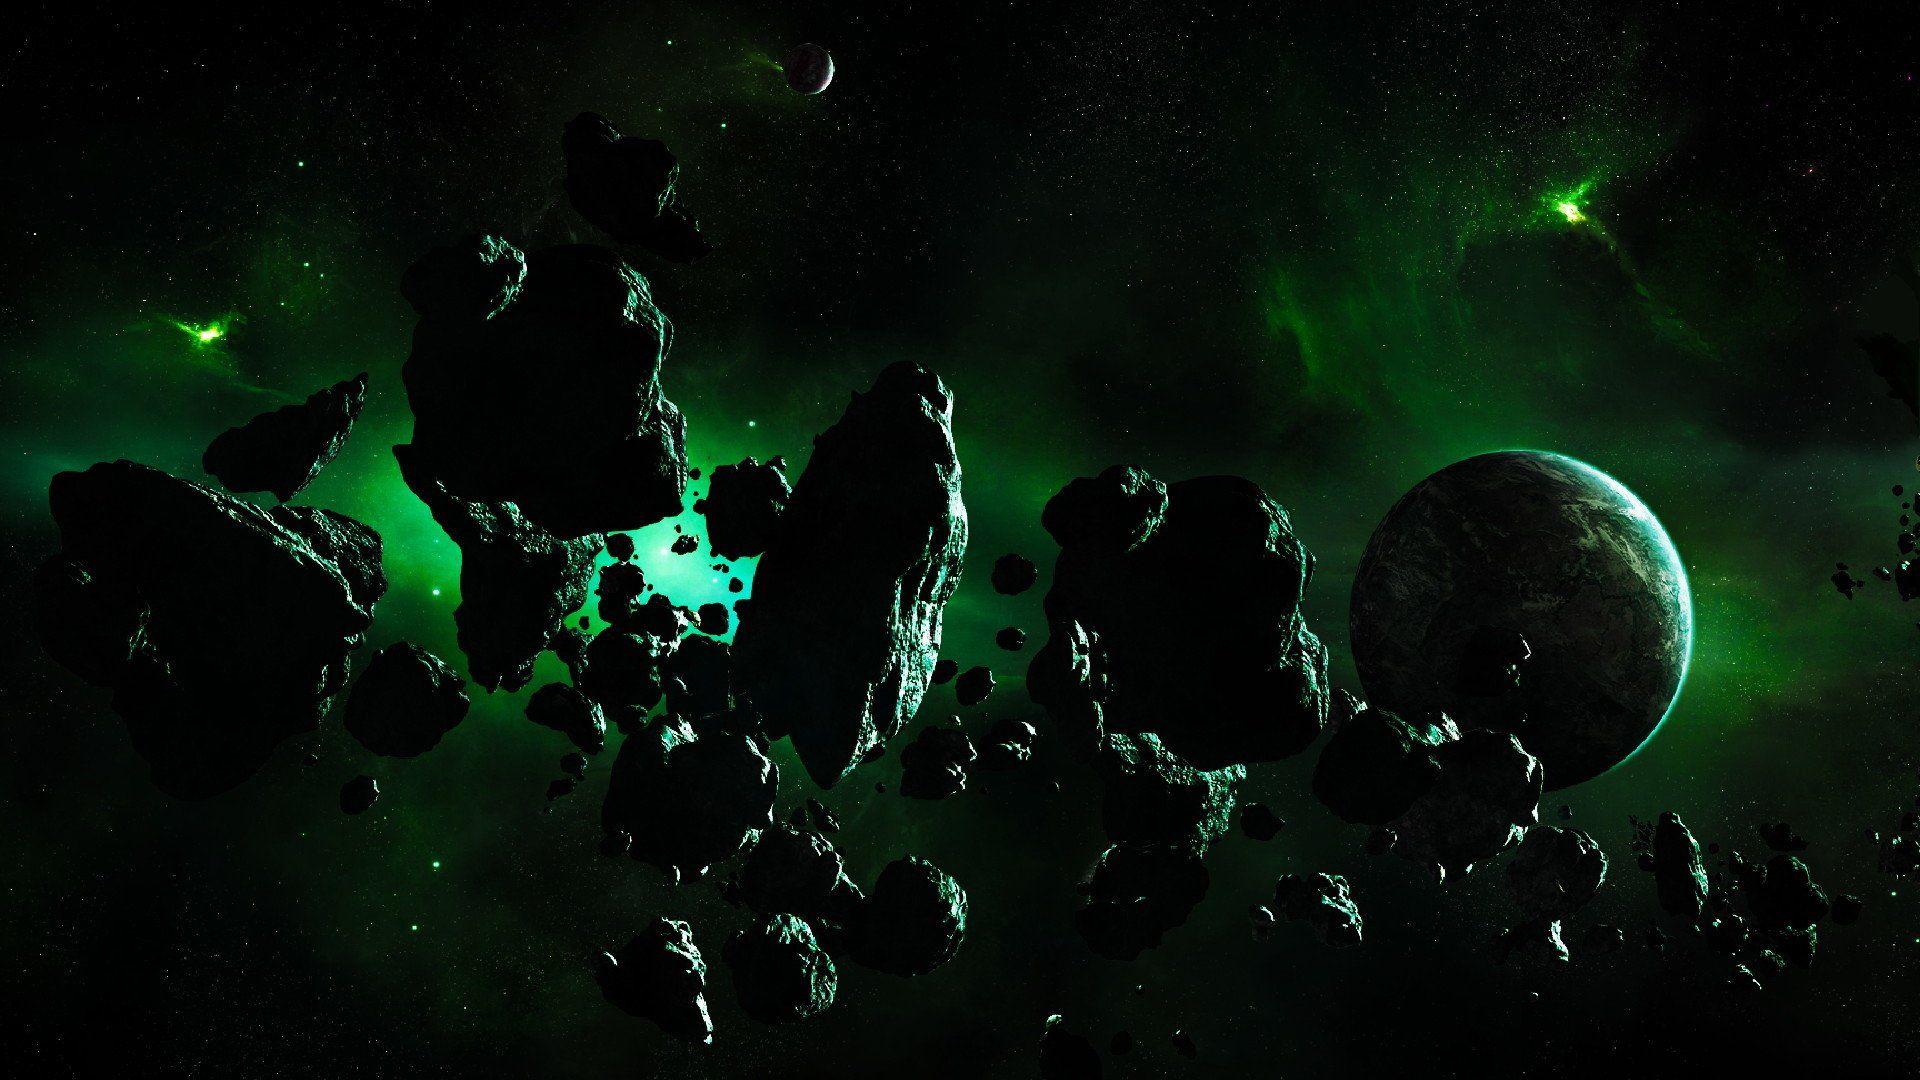 Asteroid HD Wallpaper and Background Image